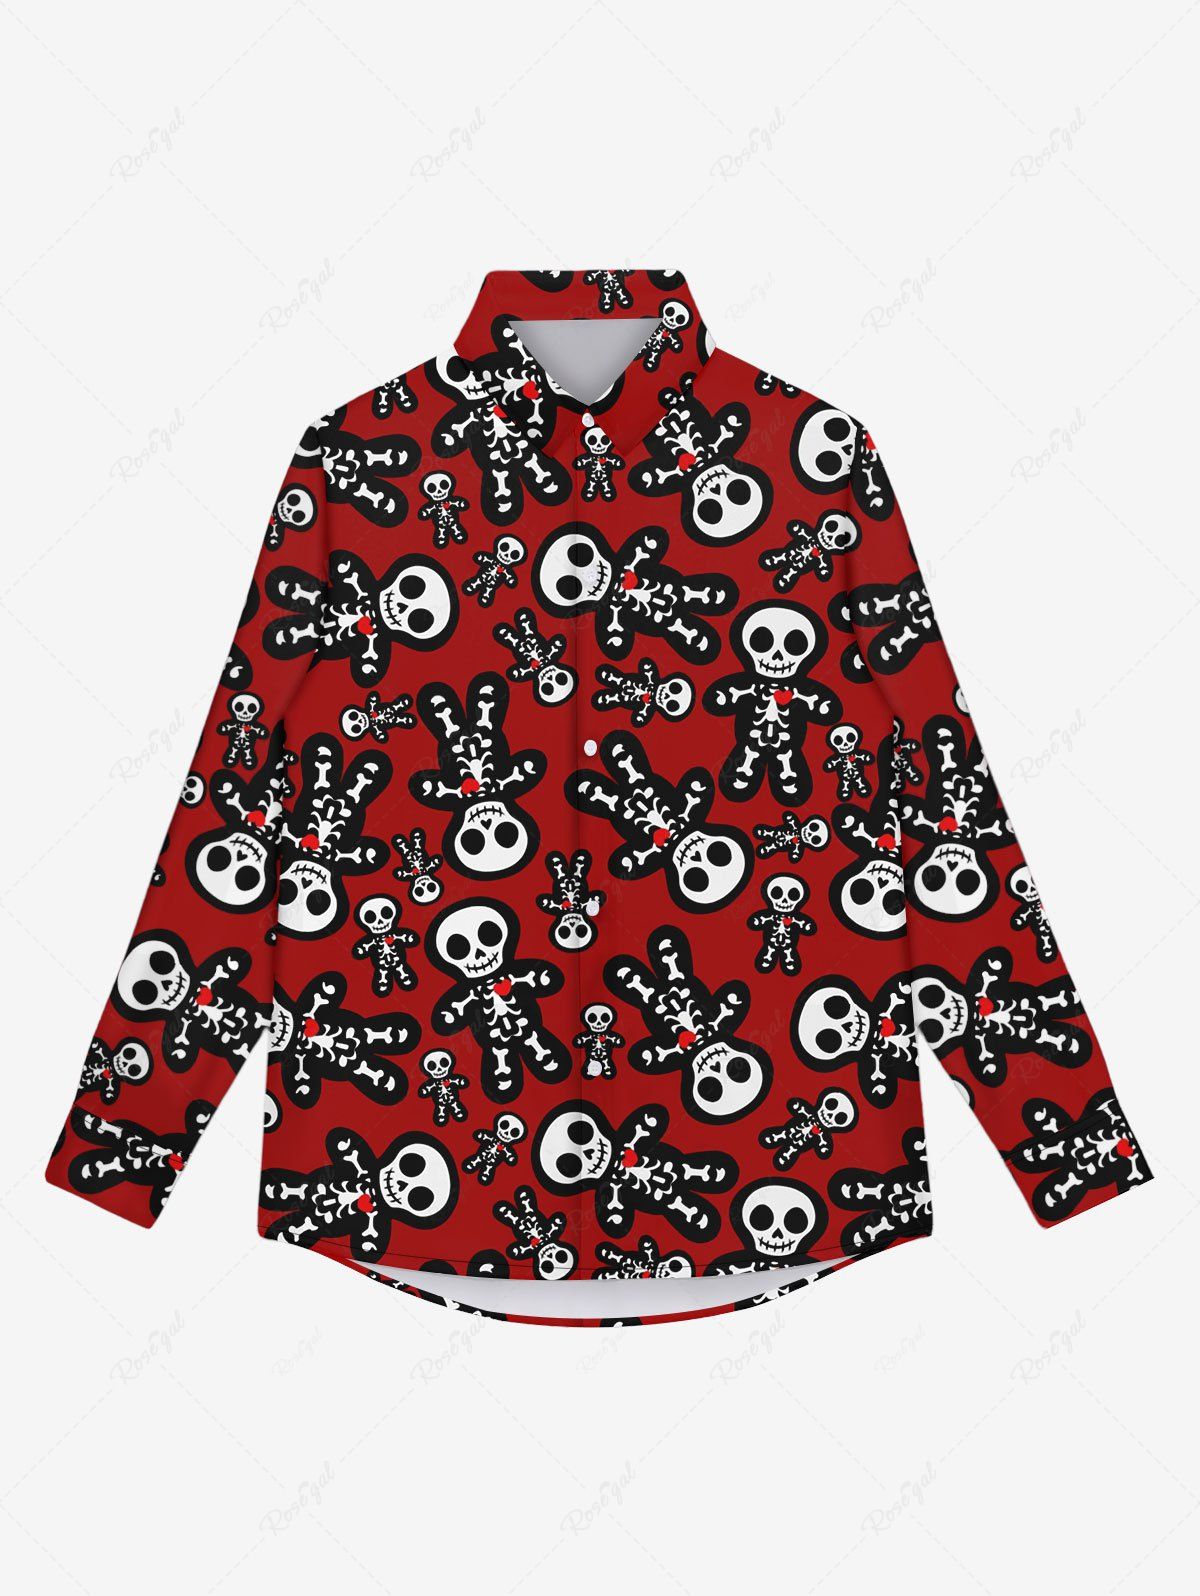 Chic Gothic Cute Skulls Skeleton Gingerbread Print Turn-down Collar Christmas Button Up Shirt For Men  